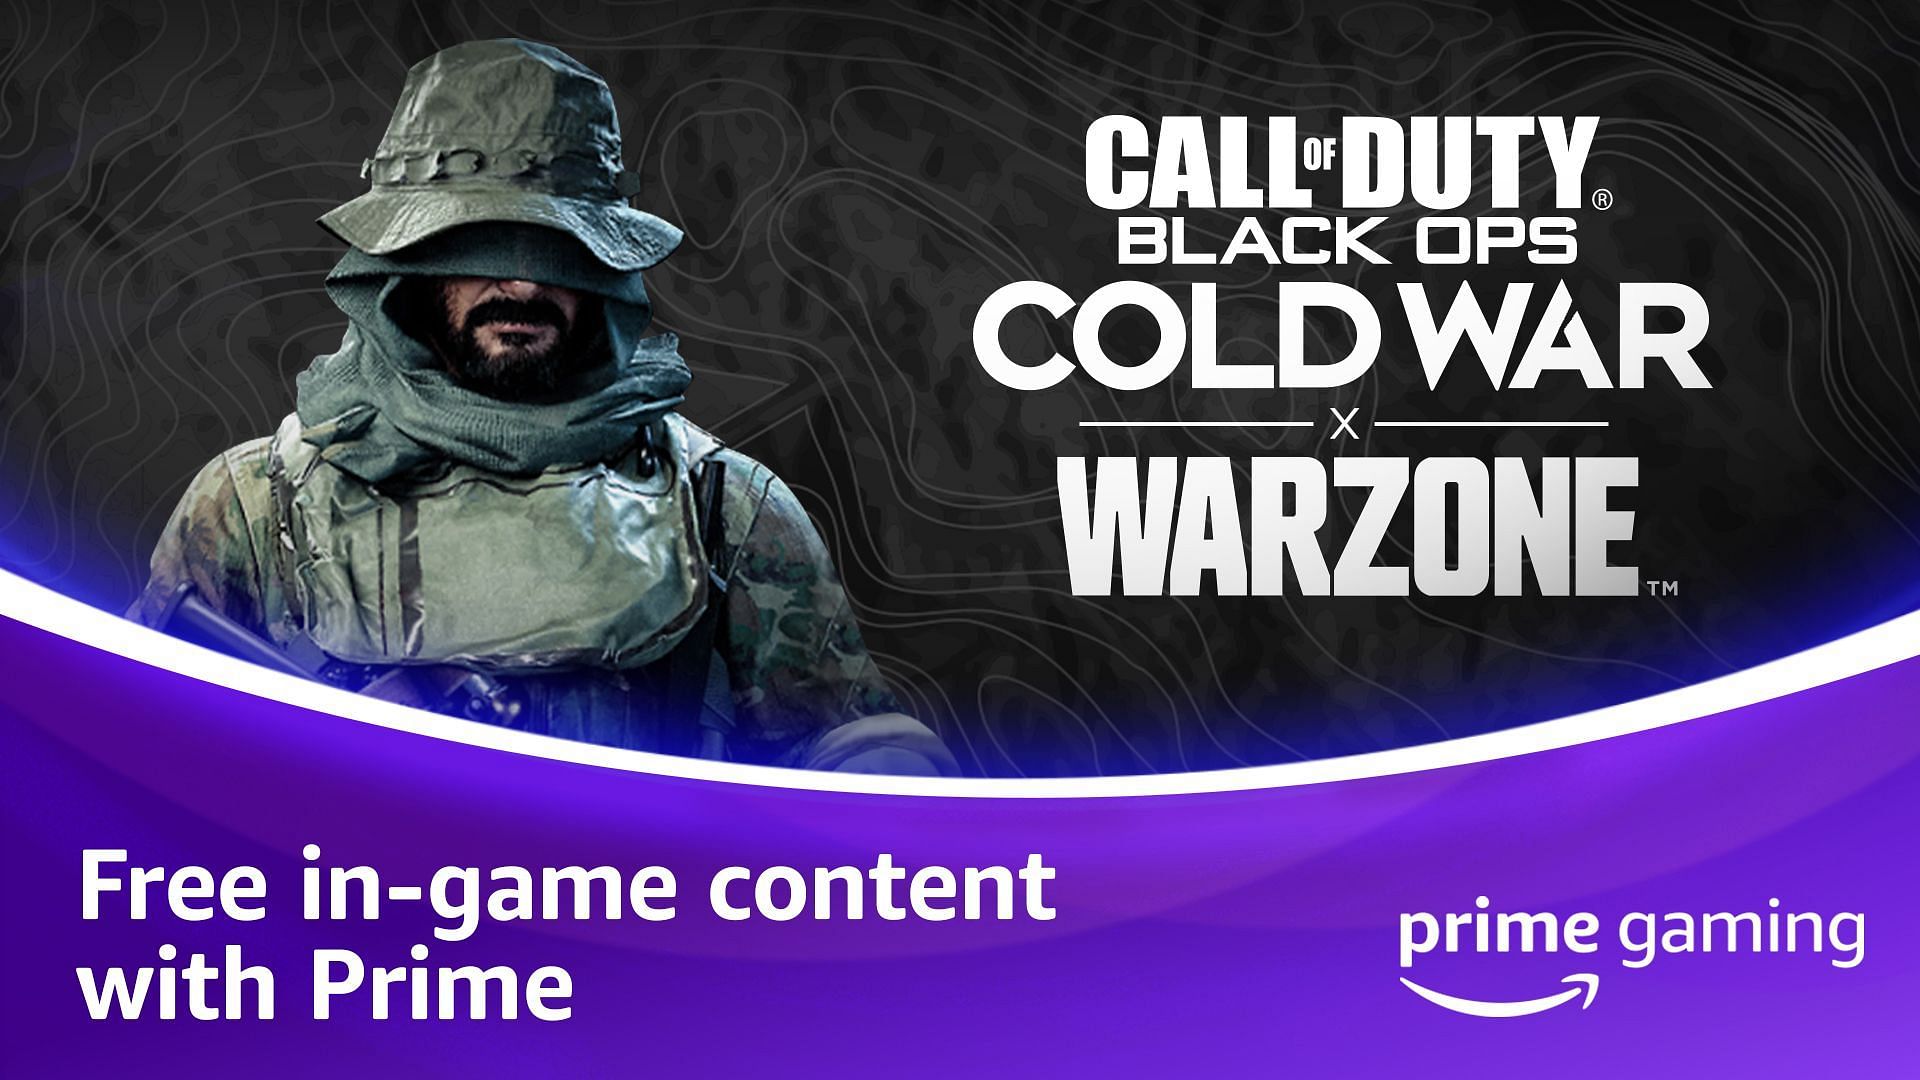 Players can redeem great rewards with Prime Gaming (Image via Activision)